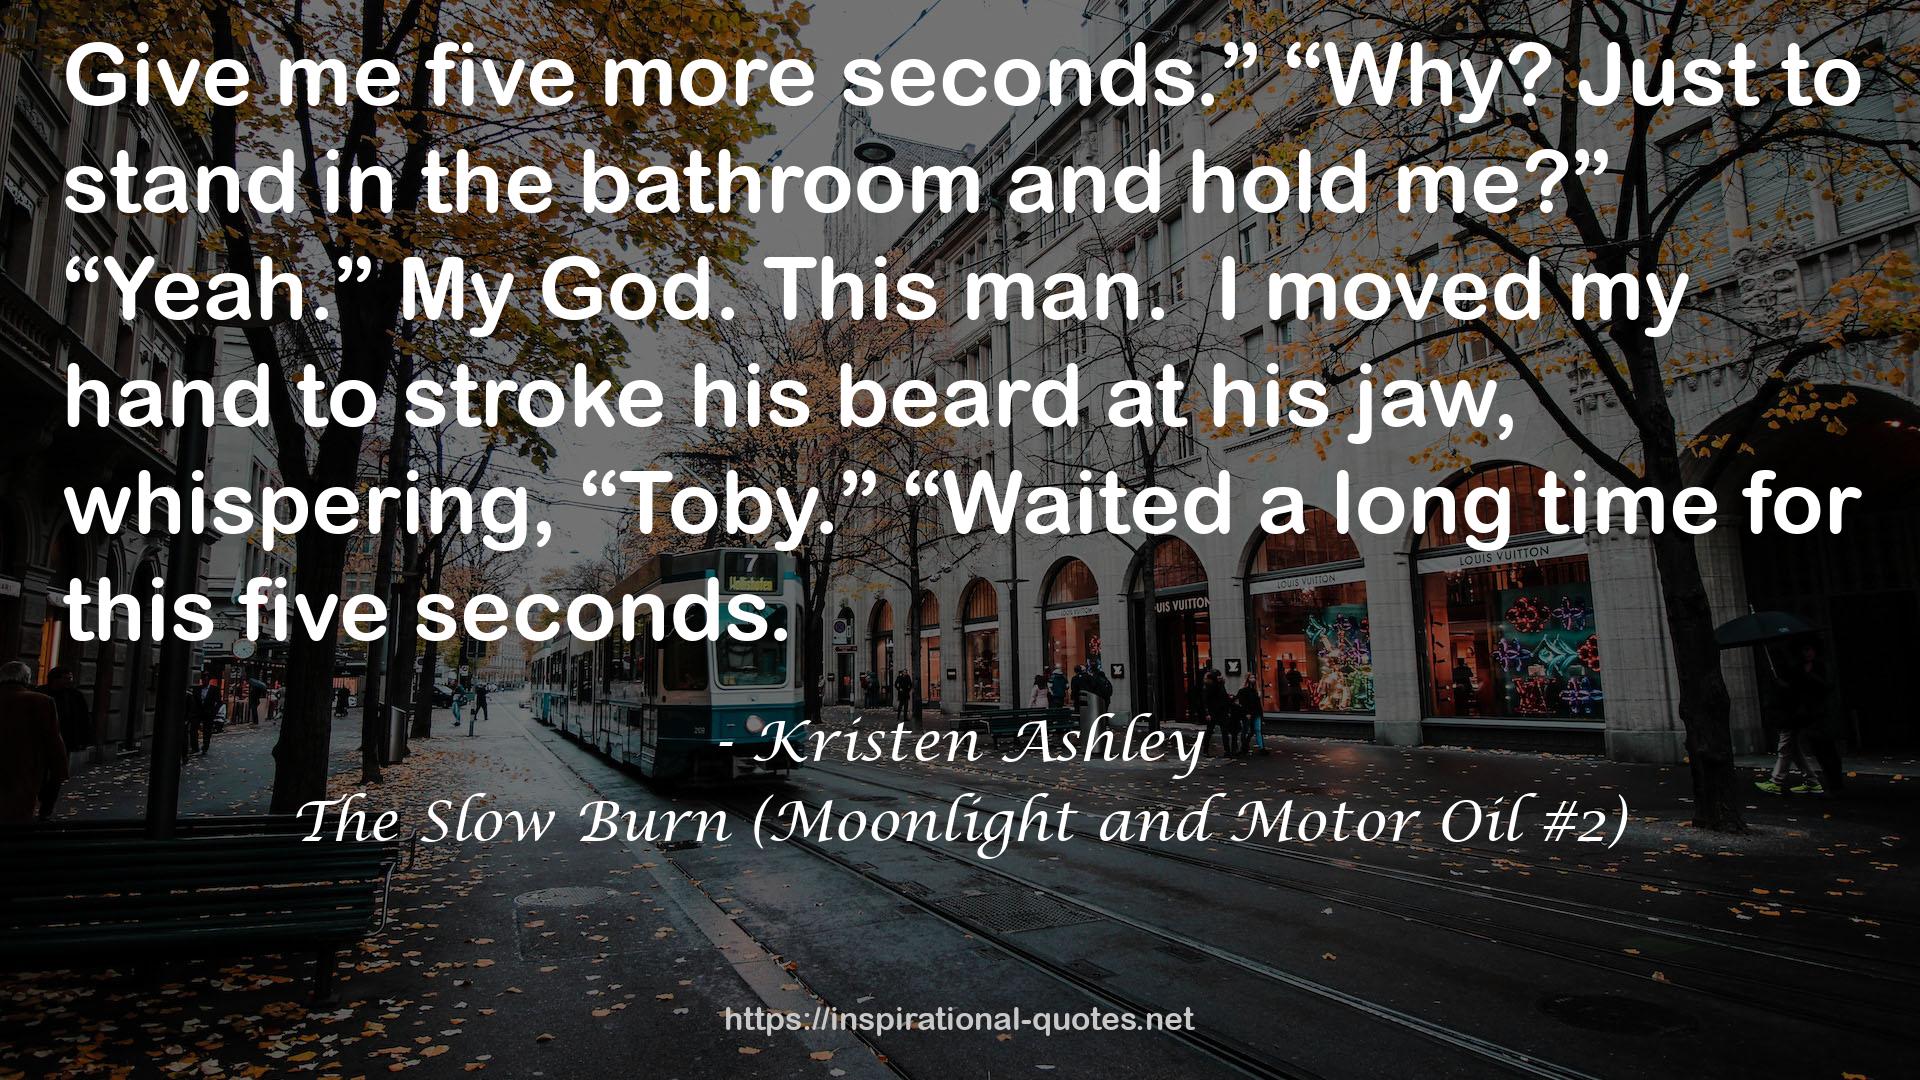 The Slow Burn (Moonlight and Motor Oil #2) QUOTES